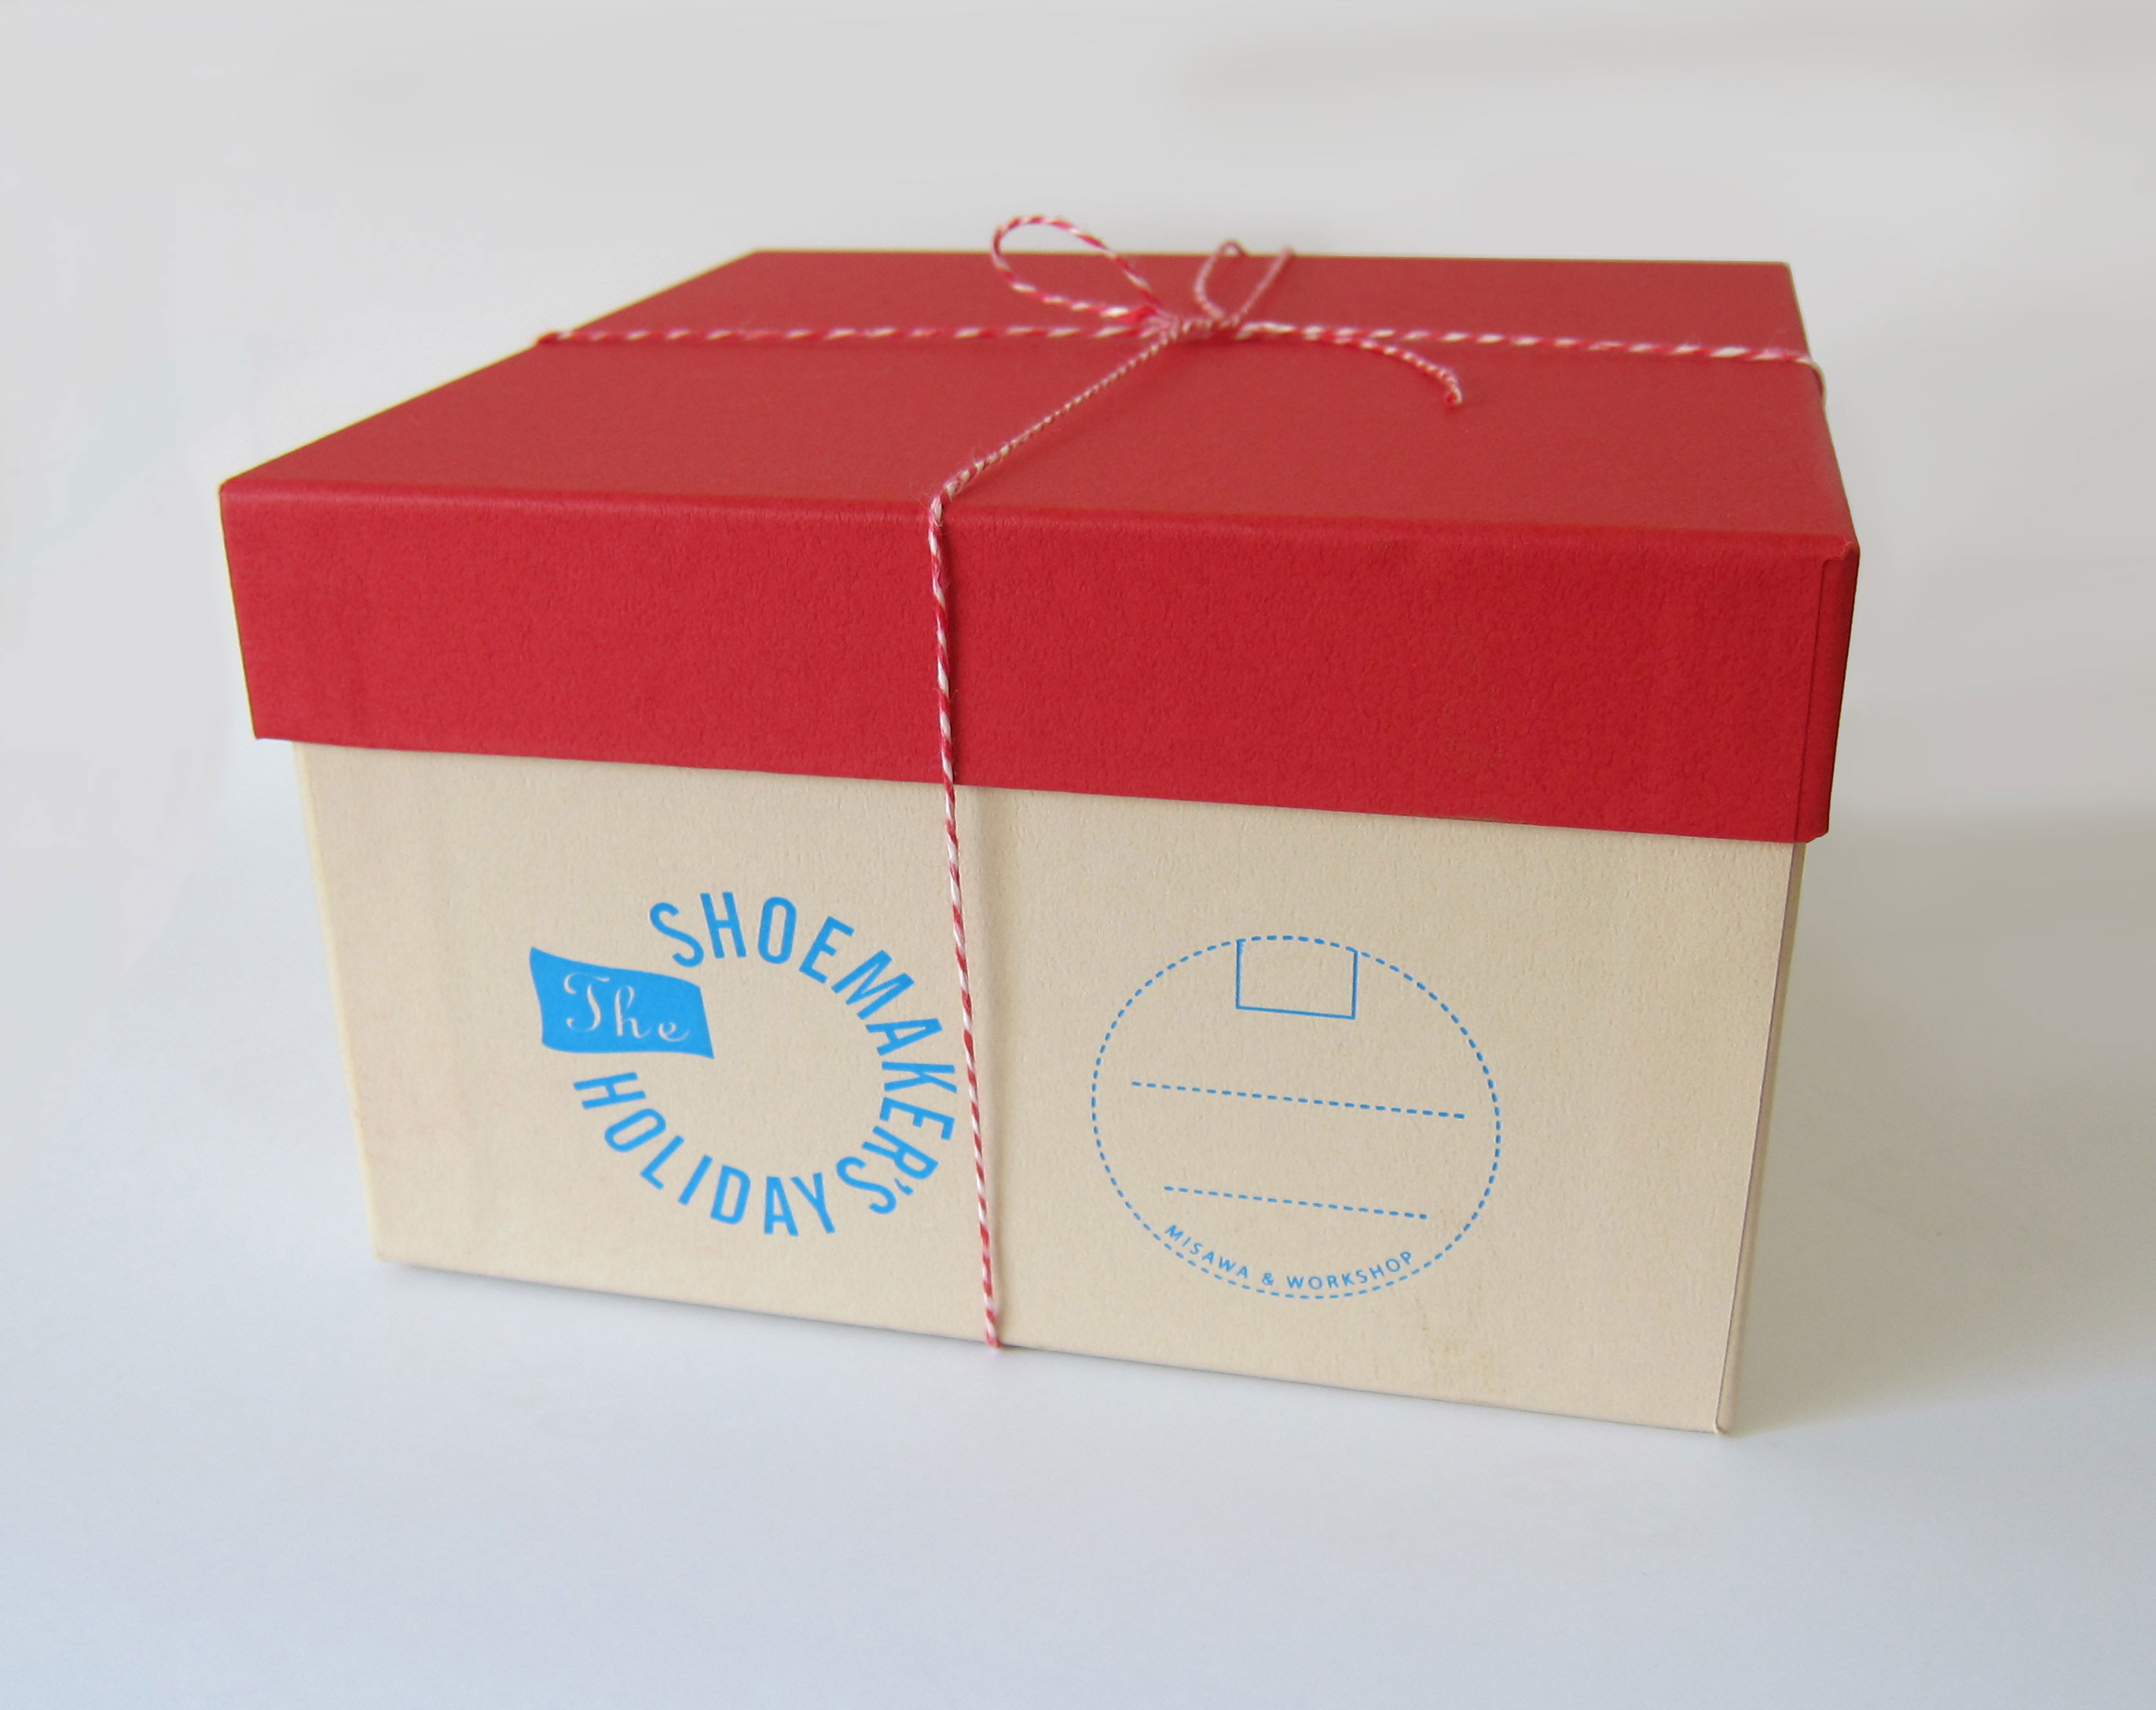 Front view of carton box with lid. Logo printed on side of box.